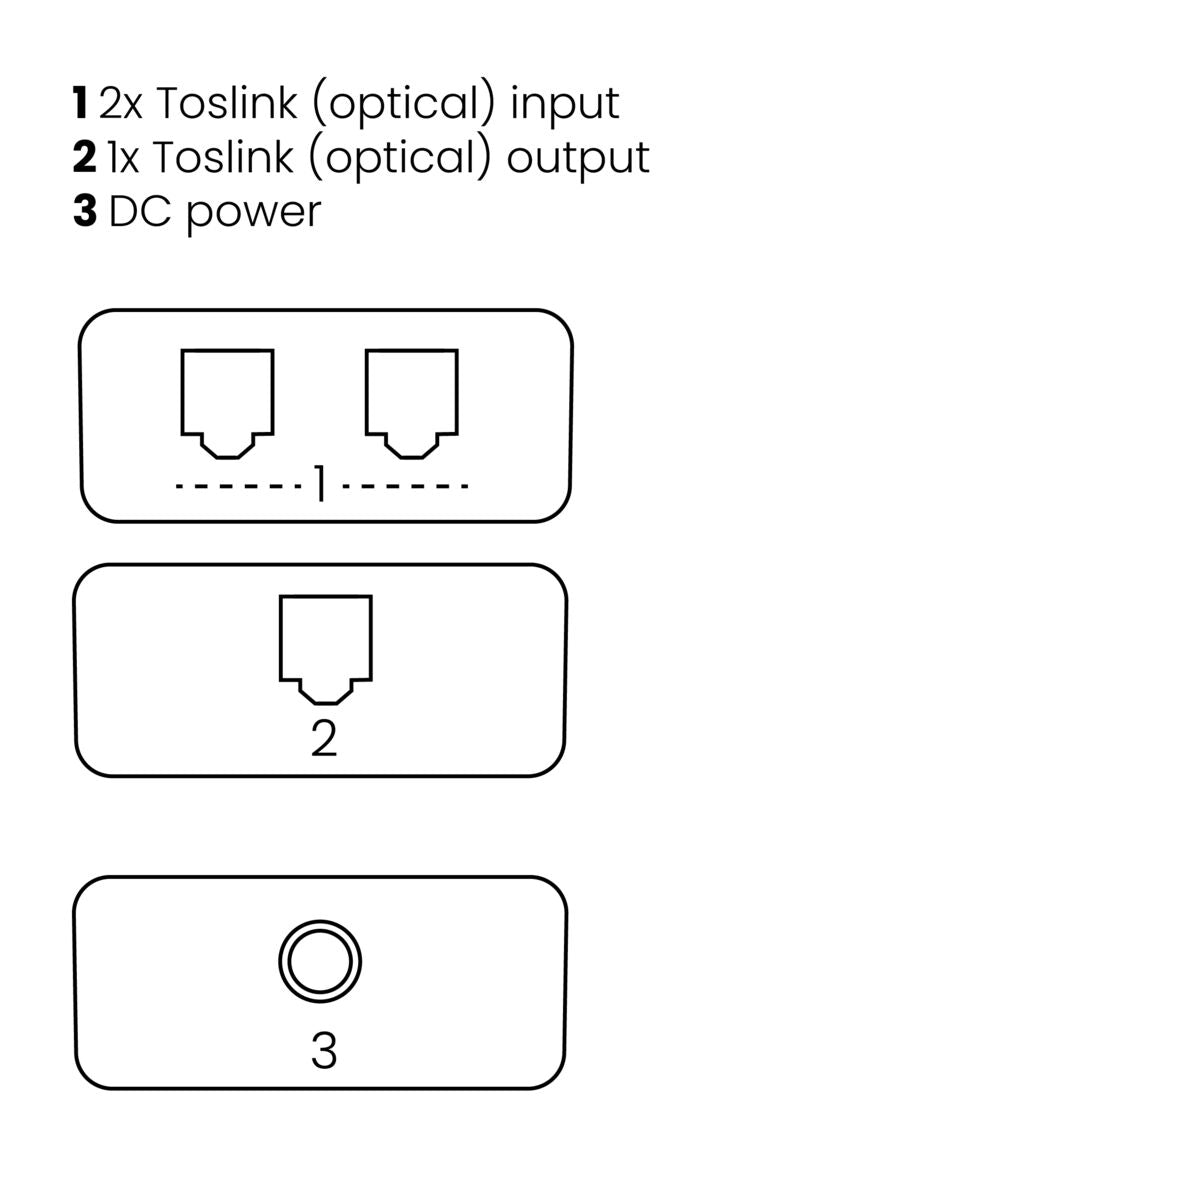 Connect TS21 - Optical switch - 2 in / 1 out - Toslink